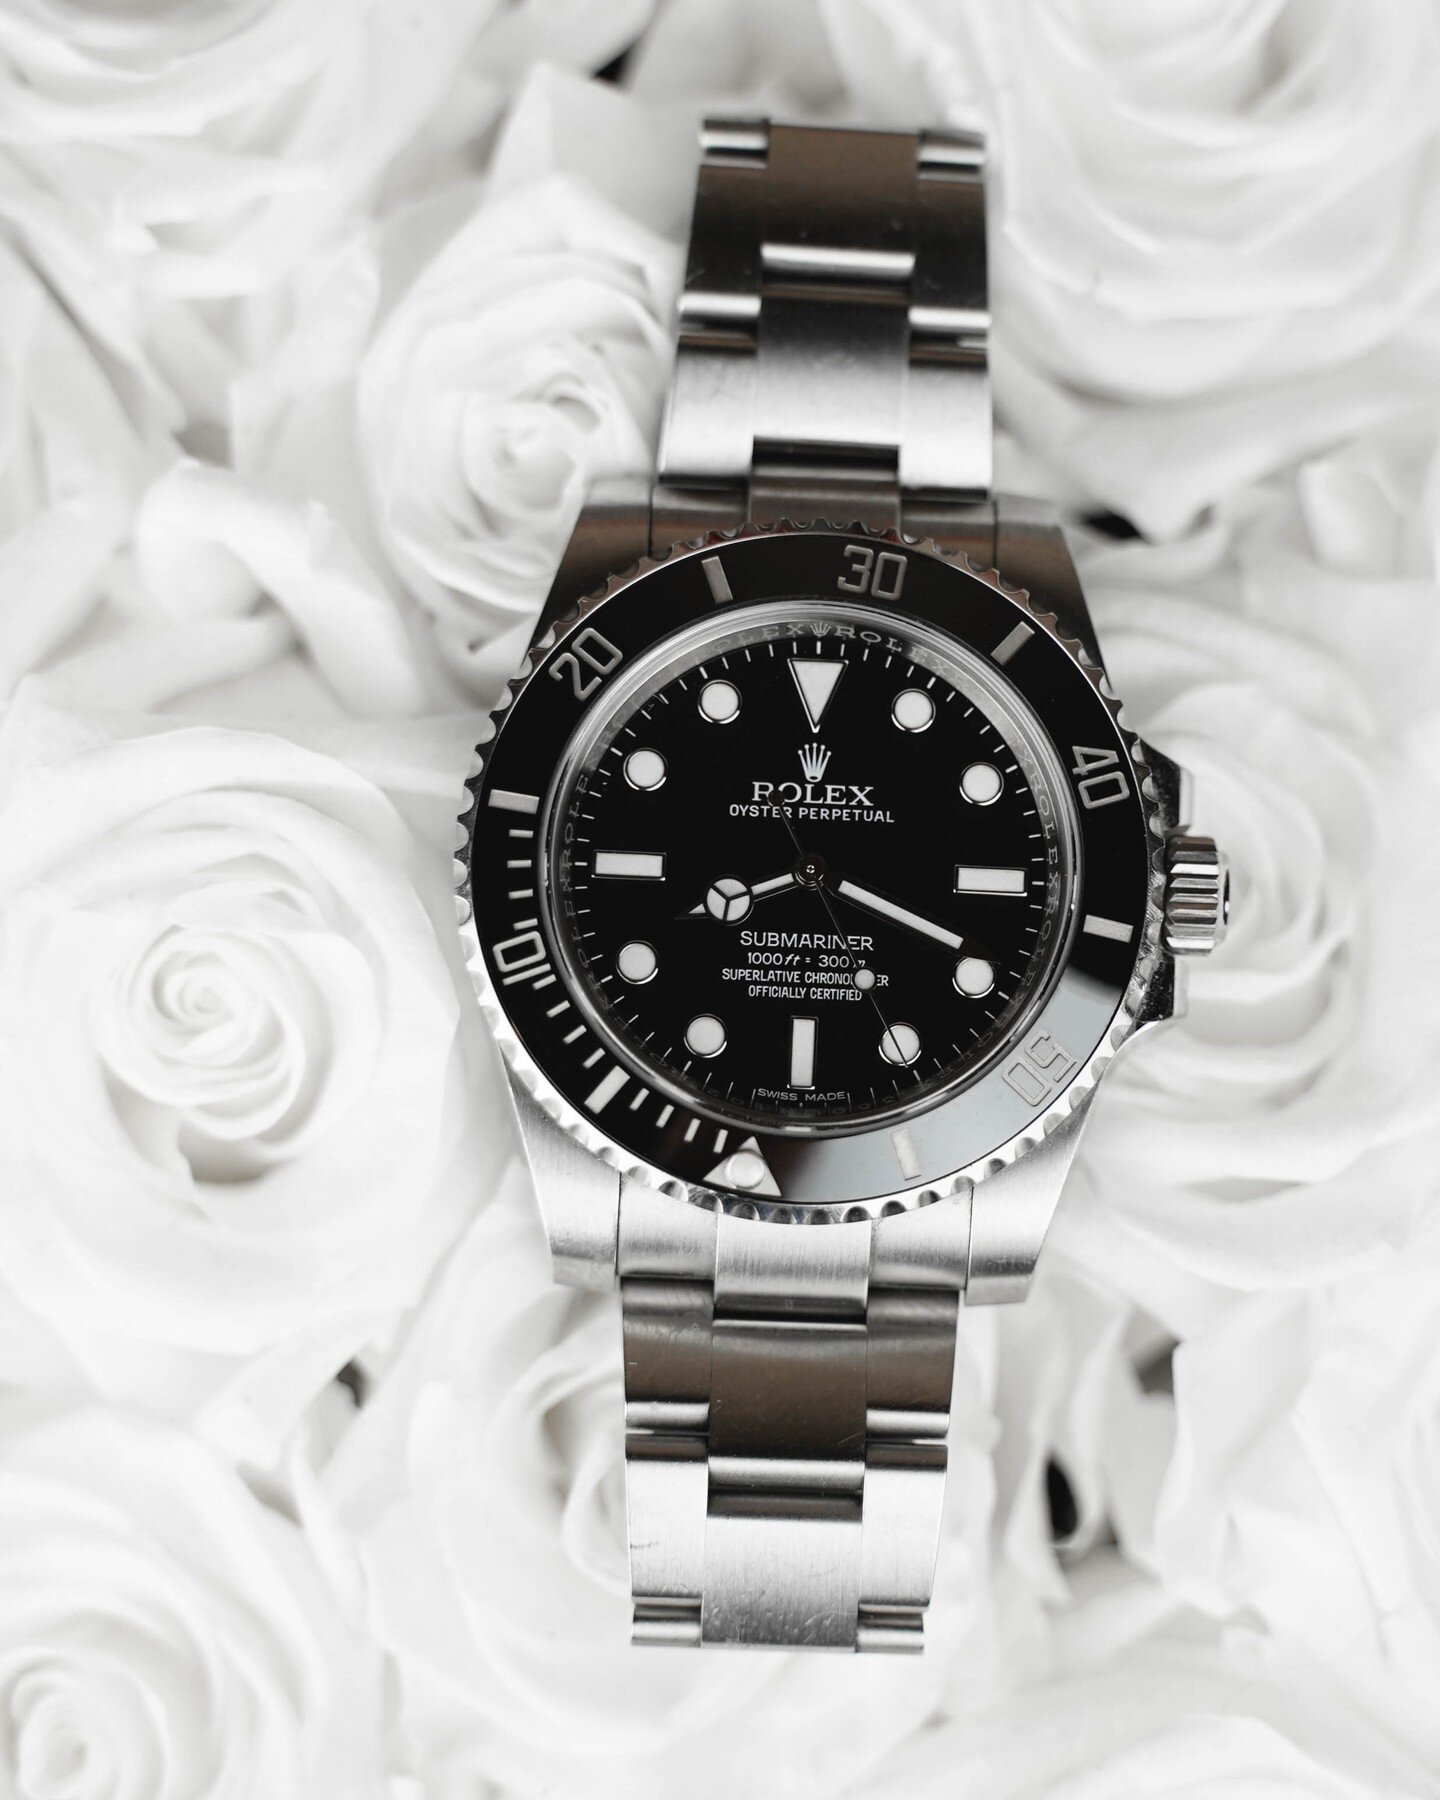 A box of roses for her. A Rolex submariner for him. How was your Valentine's Day?

Perpetual roses available while supplies last.

Link in bio.